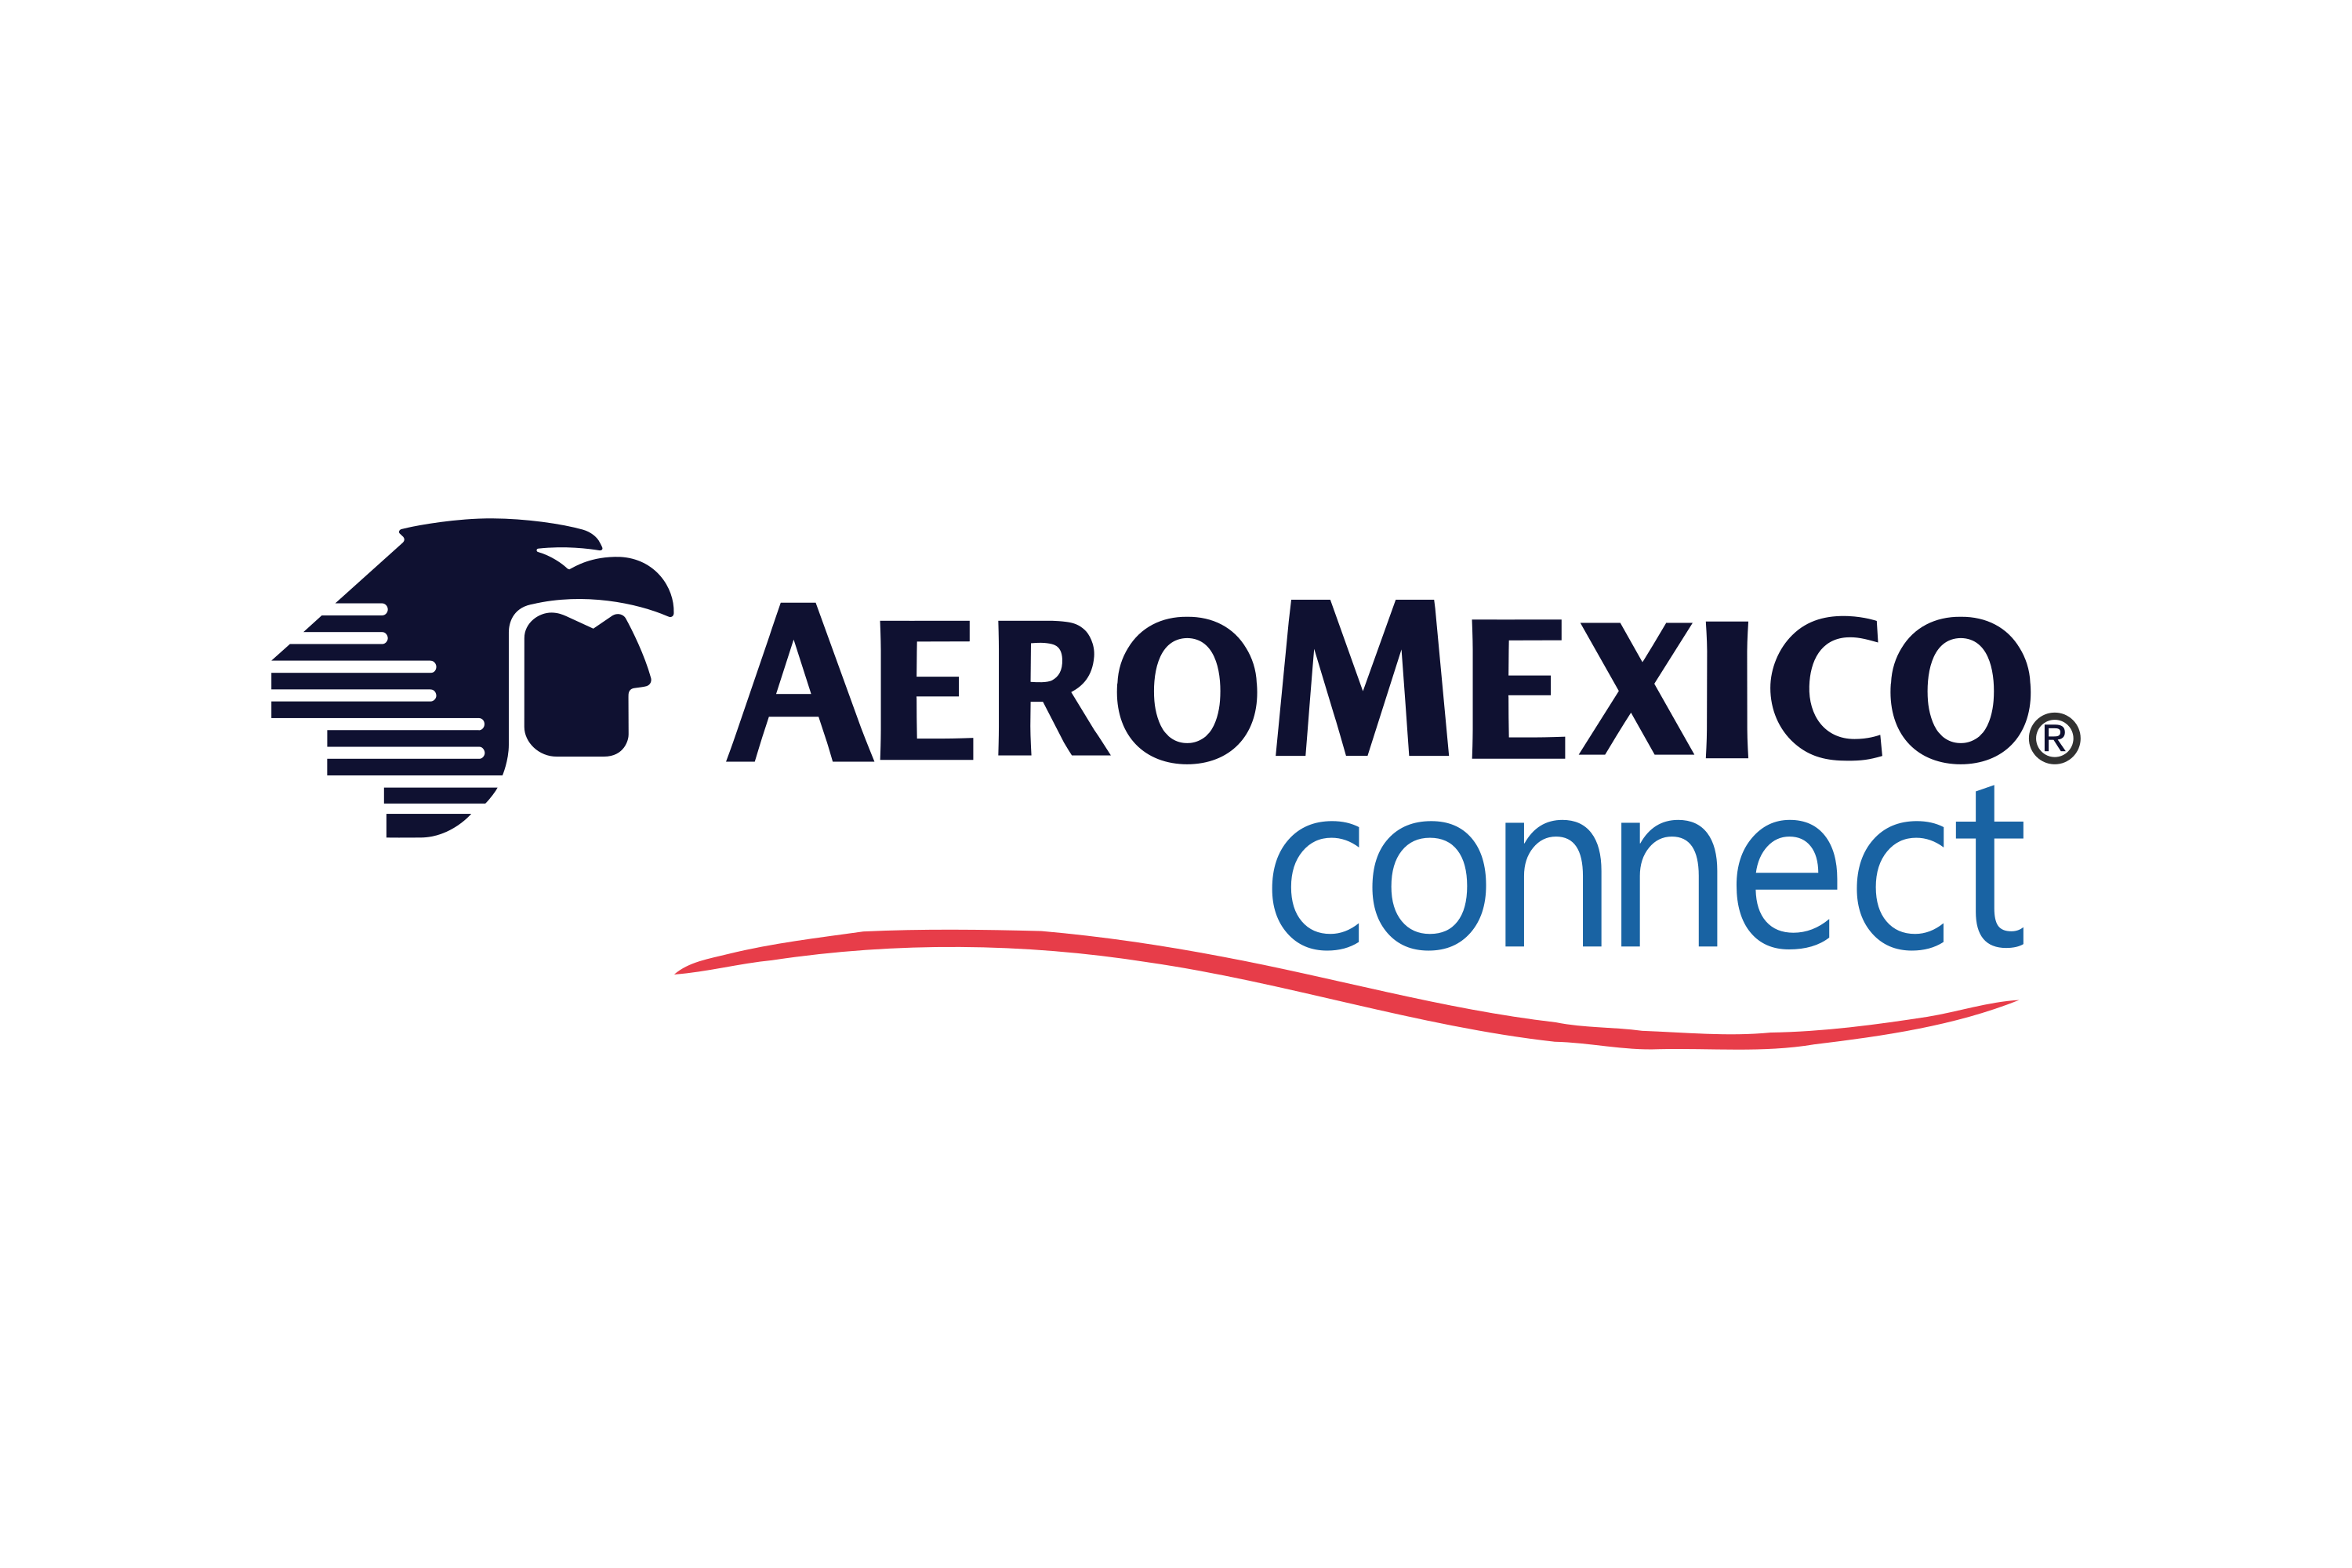 Download Aeroméxico Connect Logo in SVG Vector or PNG File Format